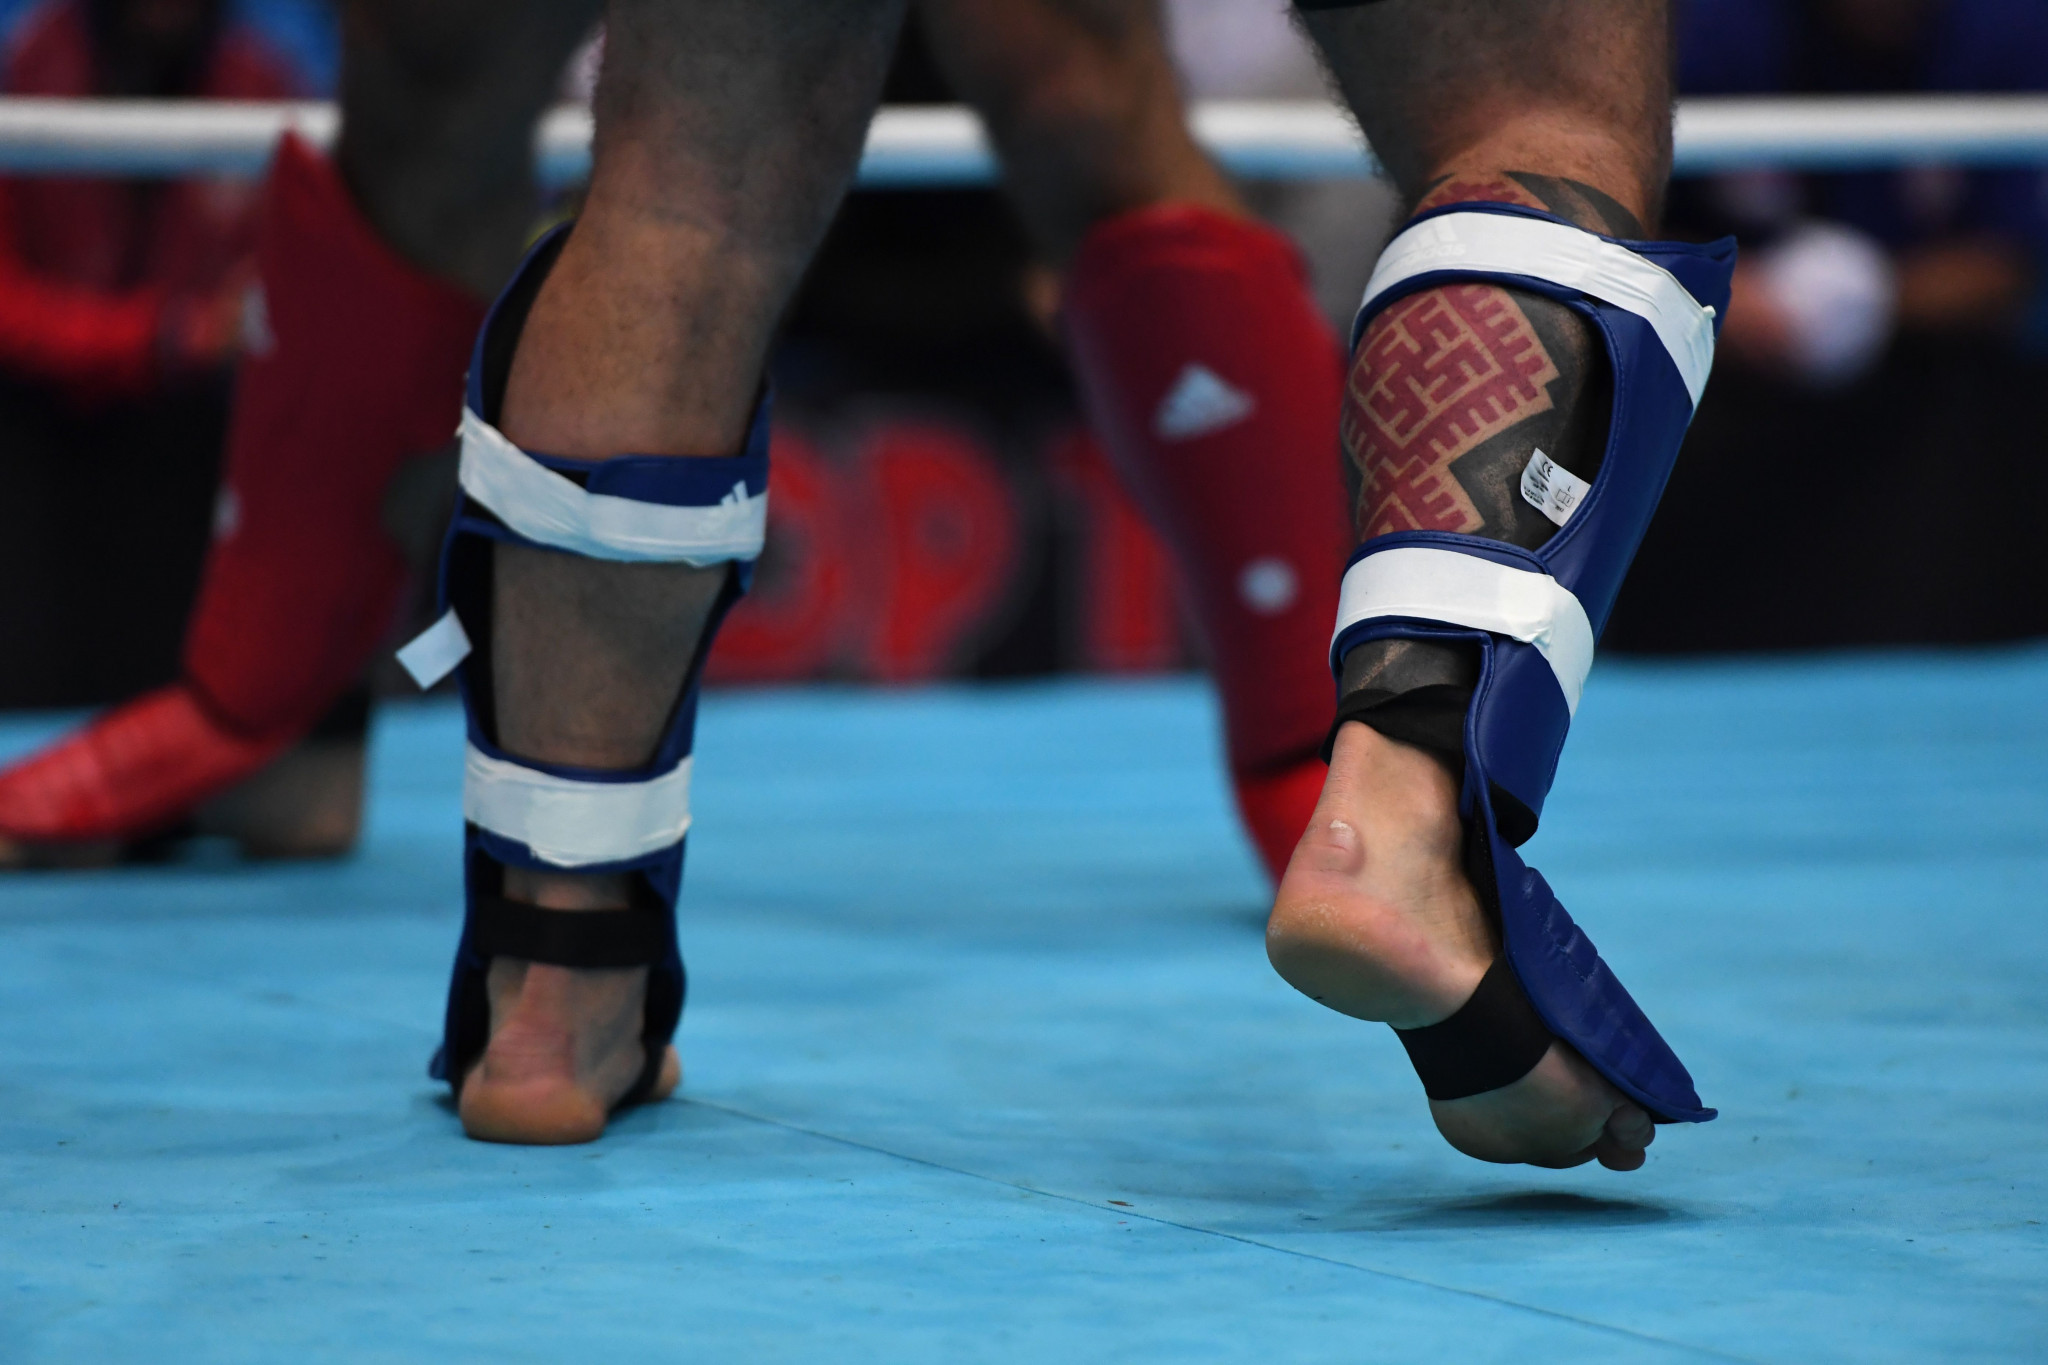 Kickboxing earned full recognition from the Global Association of International Sport Federations this year ©Getty Images